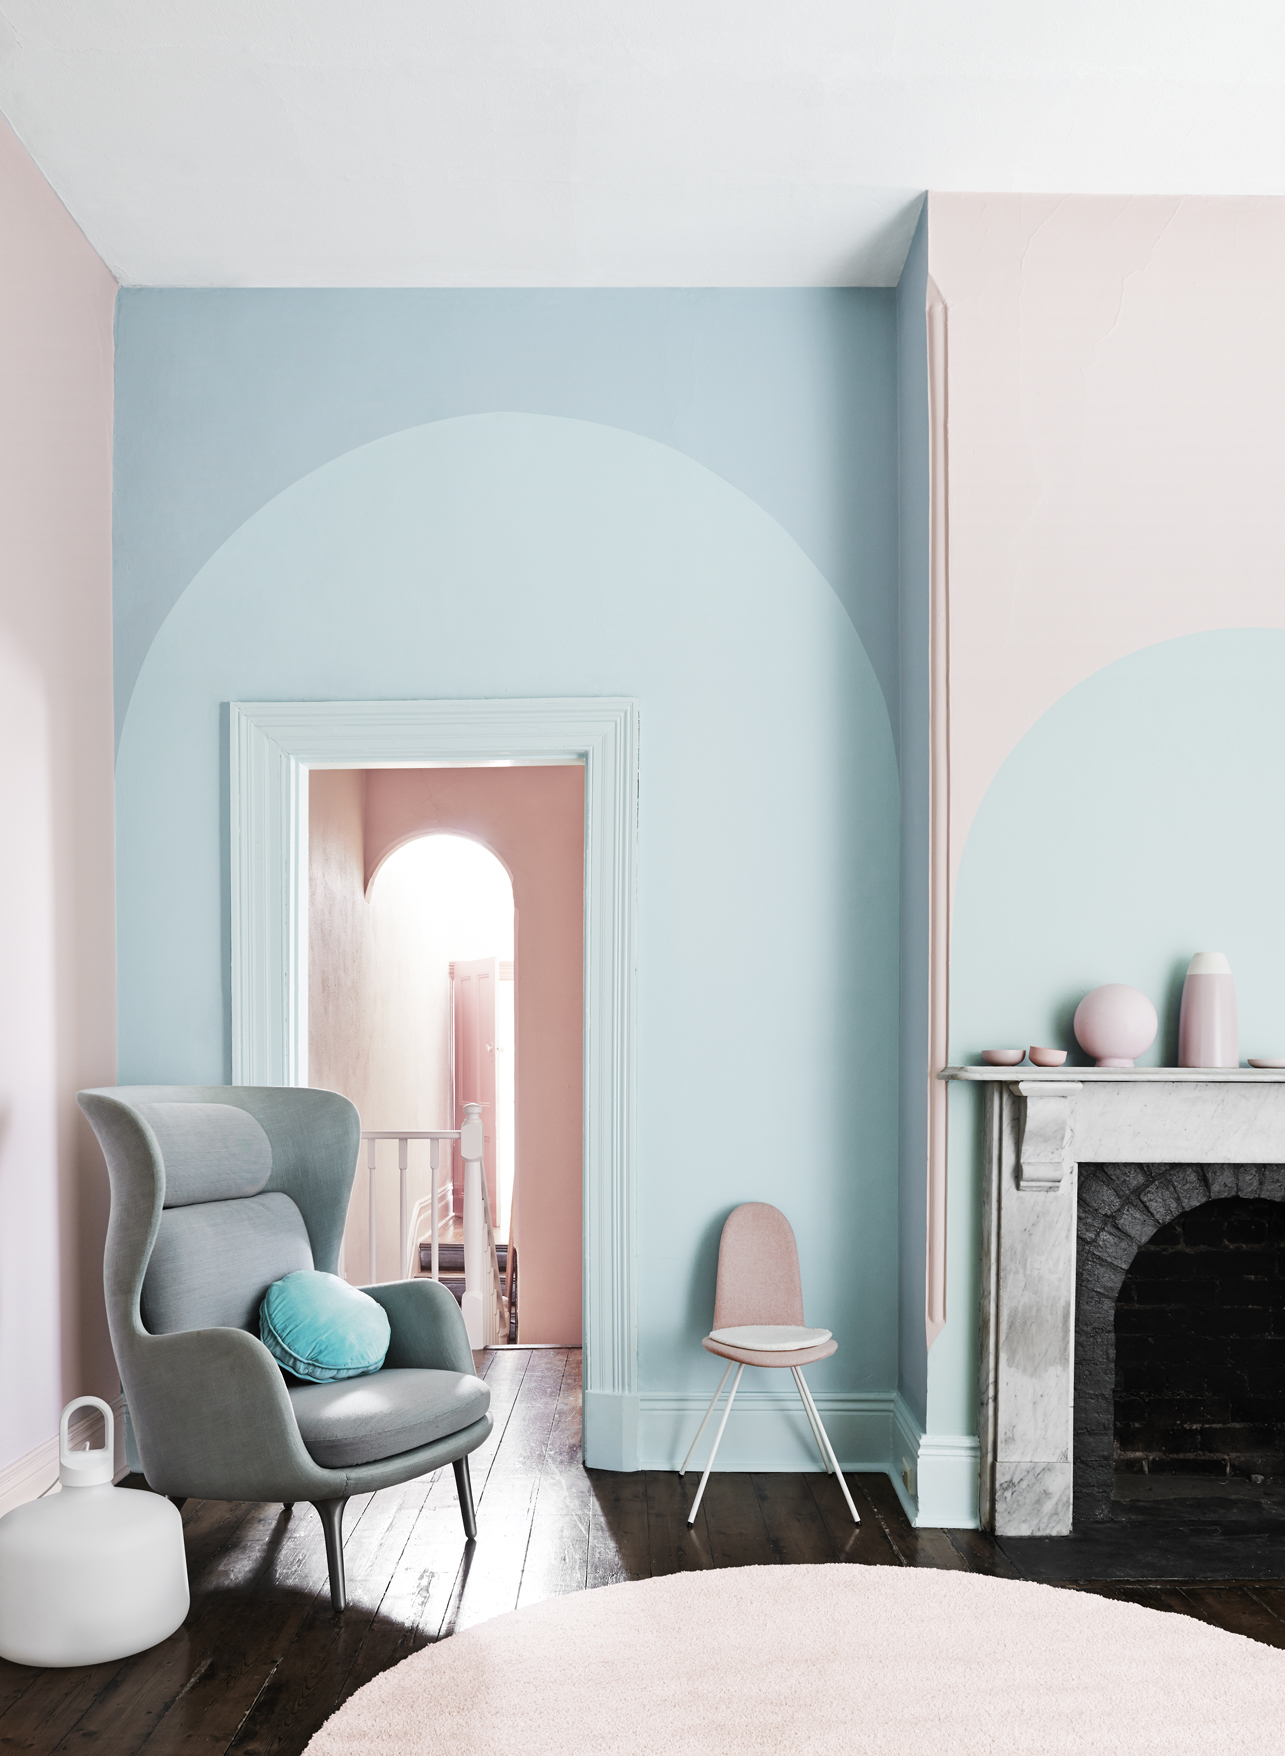 Styled by Edwards Moore for Dulux